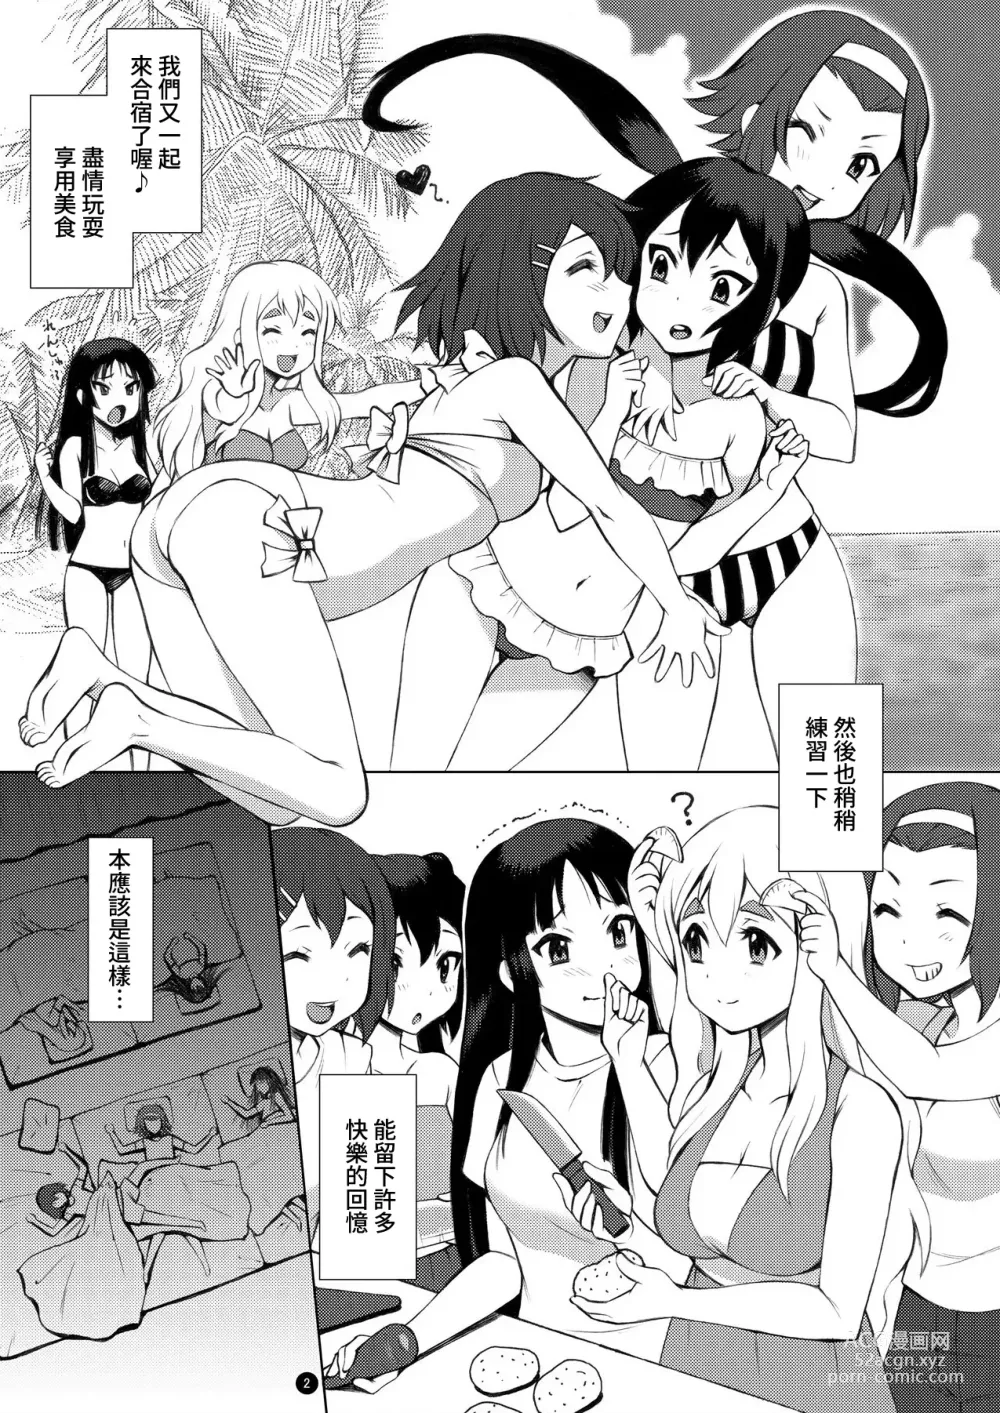 Page 3 of doujinshi WEAR OFF